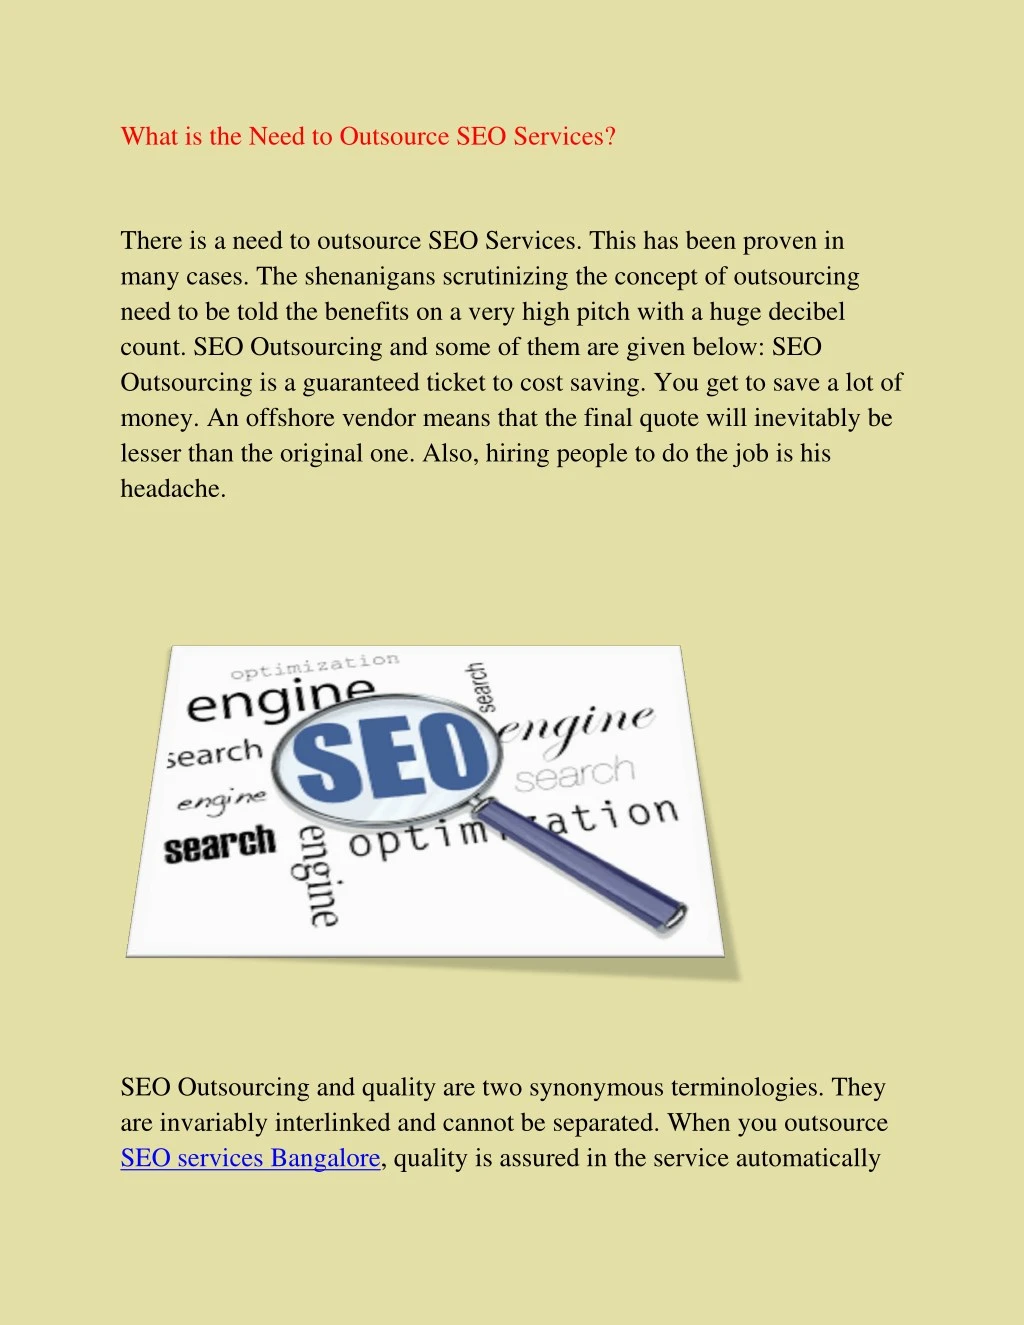 what is the need to outsource seo services